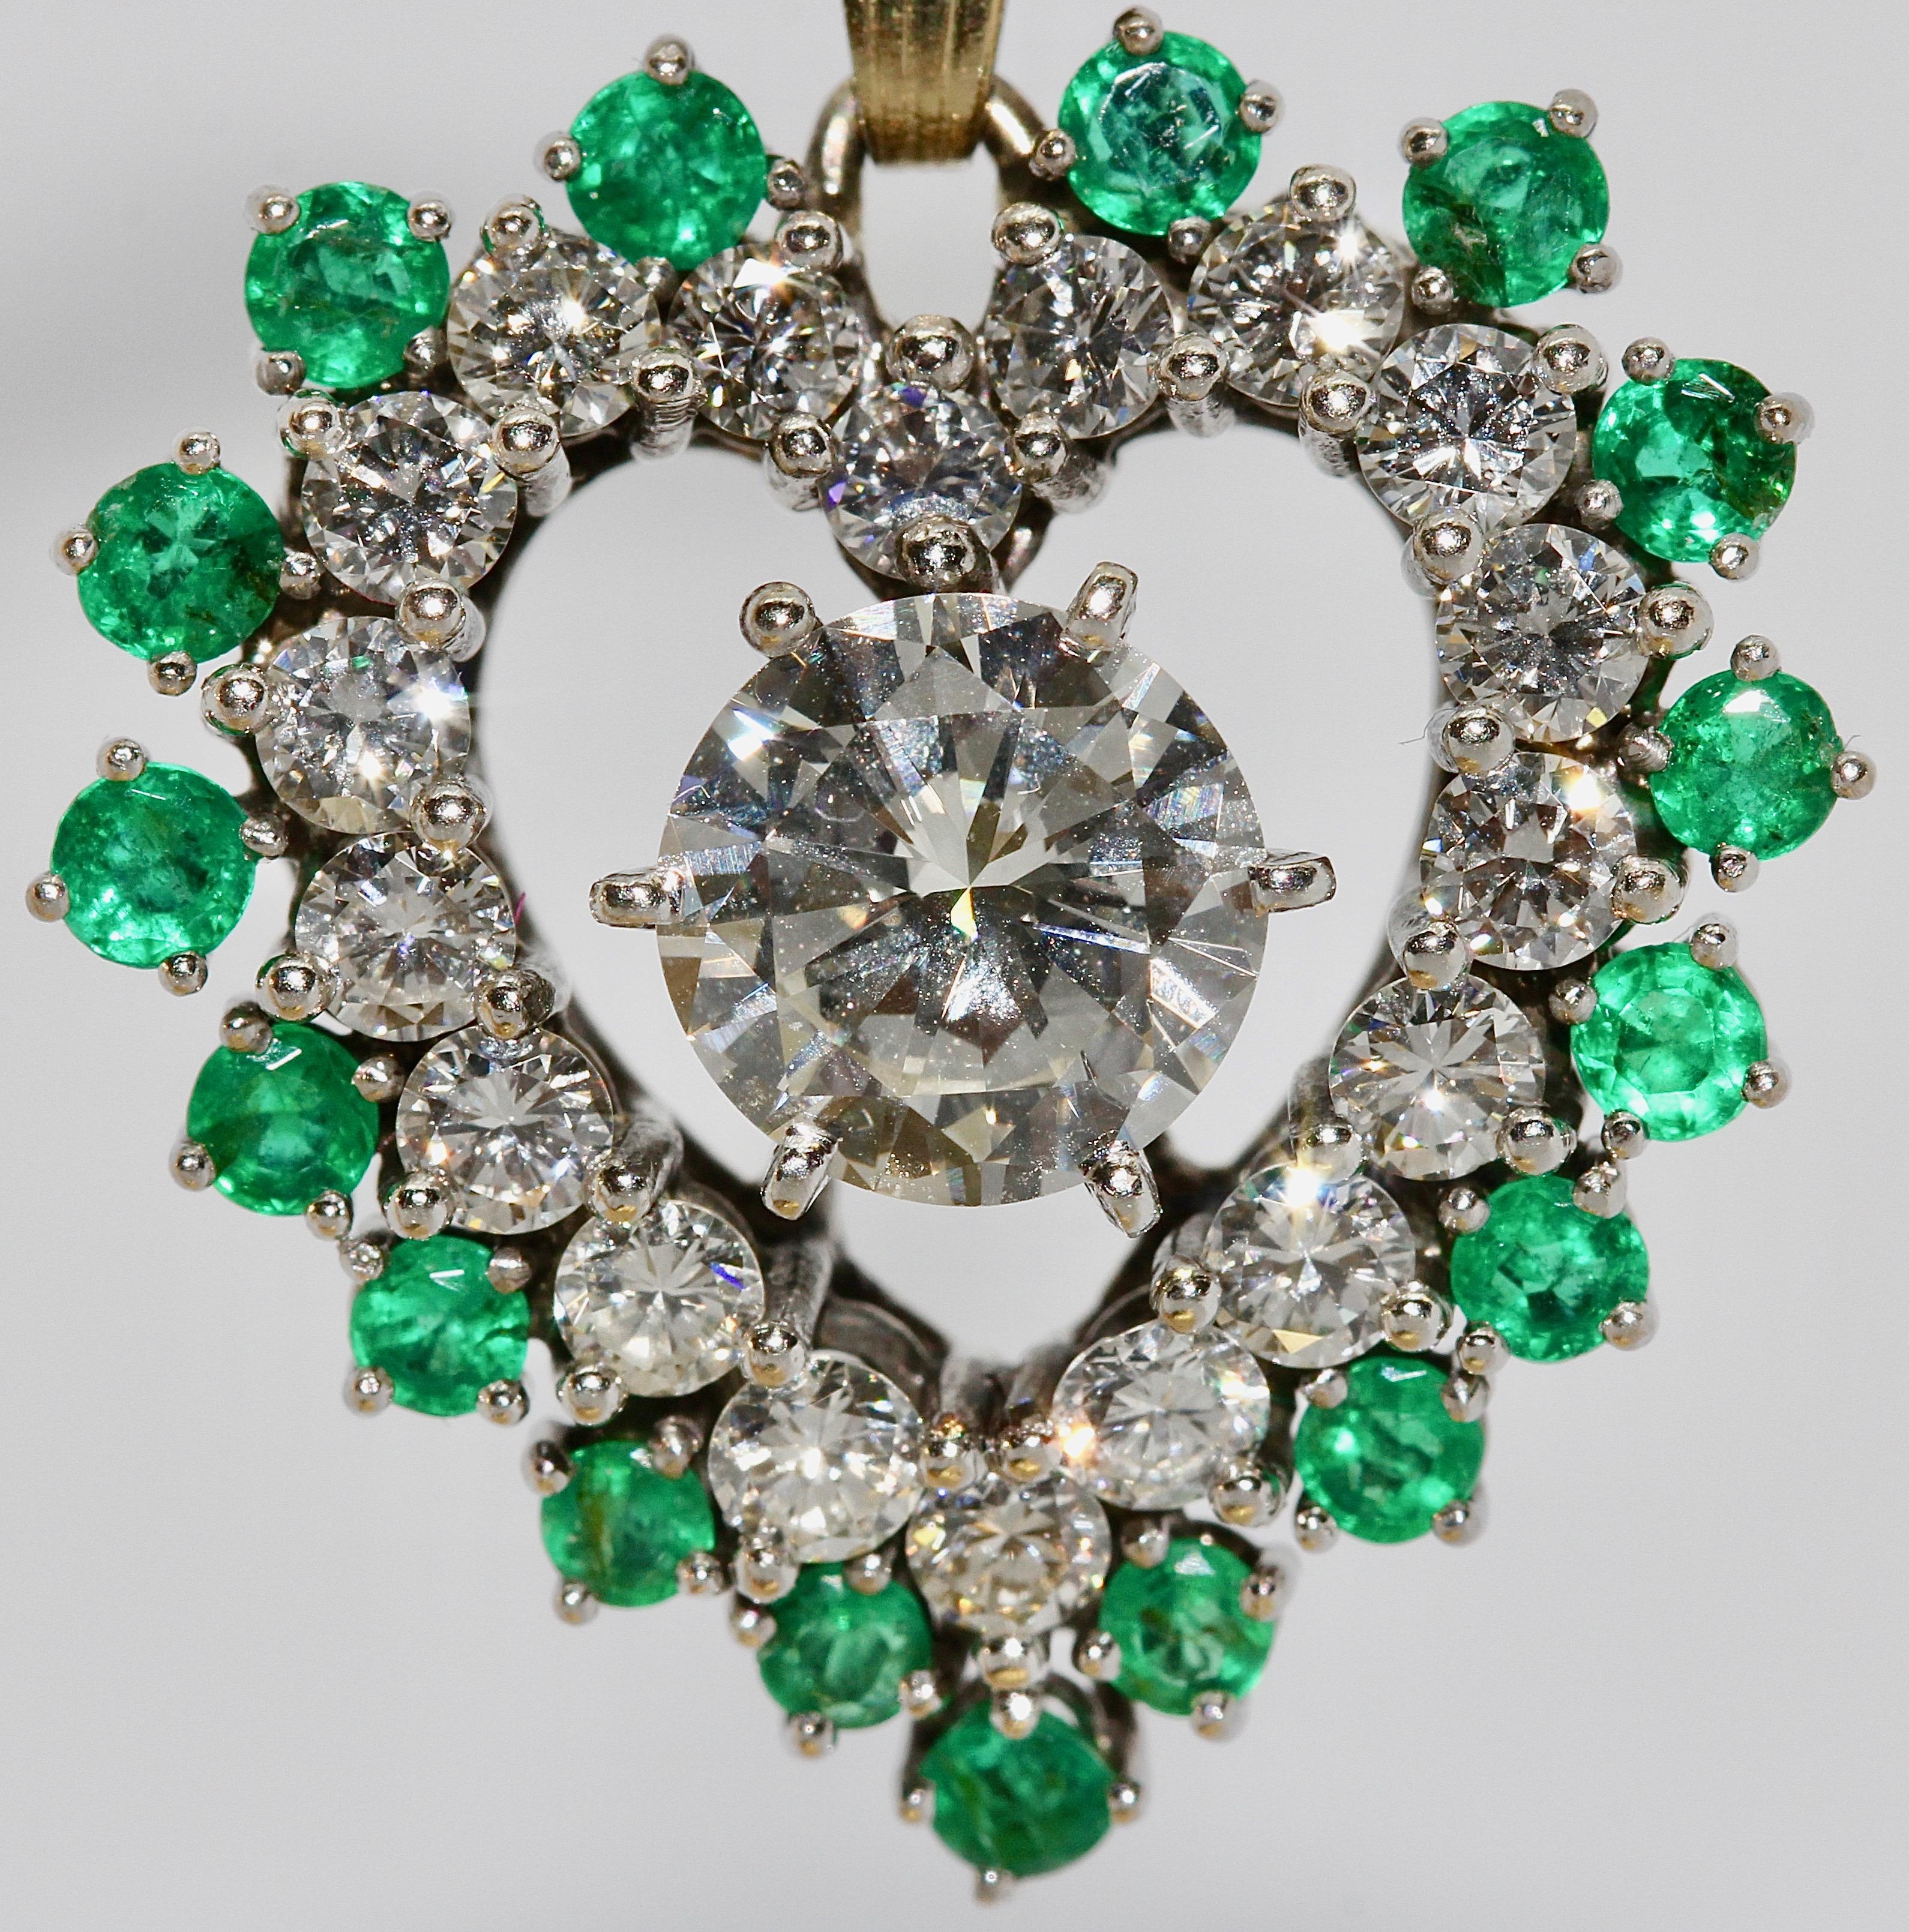 Dreamlike Diamond and Emerald Heart Pendant. 18 Karat Gold with Large Solitaire.

The large solitaire has a size of almost 1.4 carat. VVS1, color Top Wesselton.

The 18 small diamonds have a total weight of about 1.2 ct.

The clarity of the small